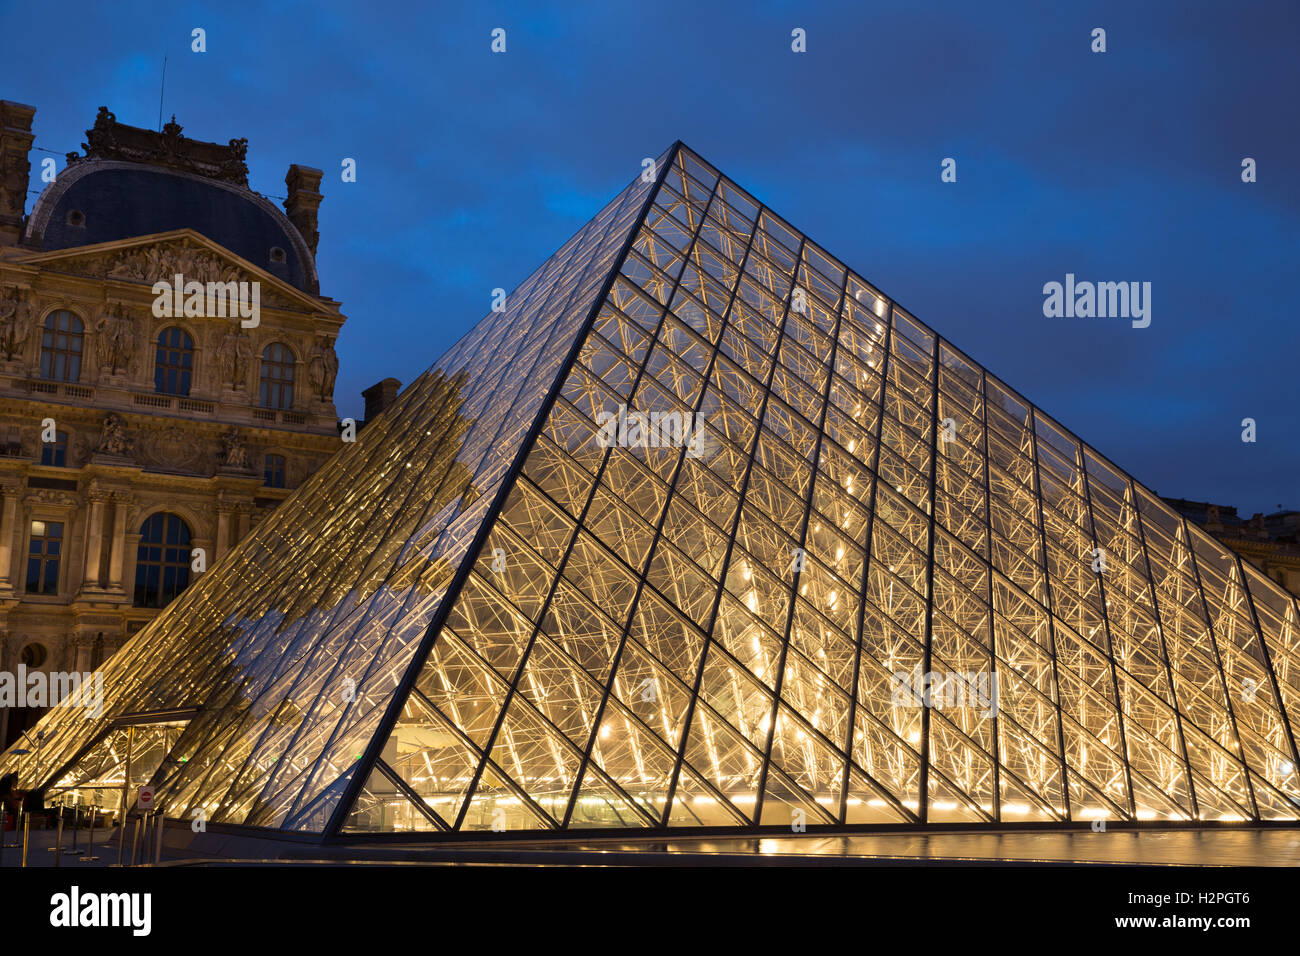 The main (Pyramid) entrance of the Louvre, Paris, France. Stock Photo